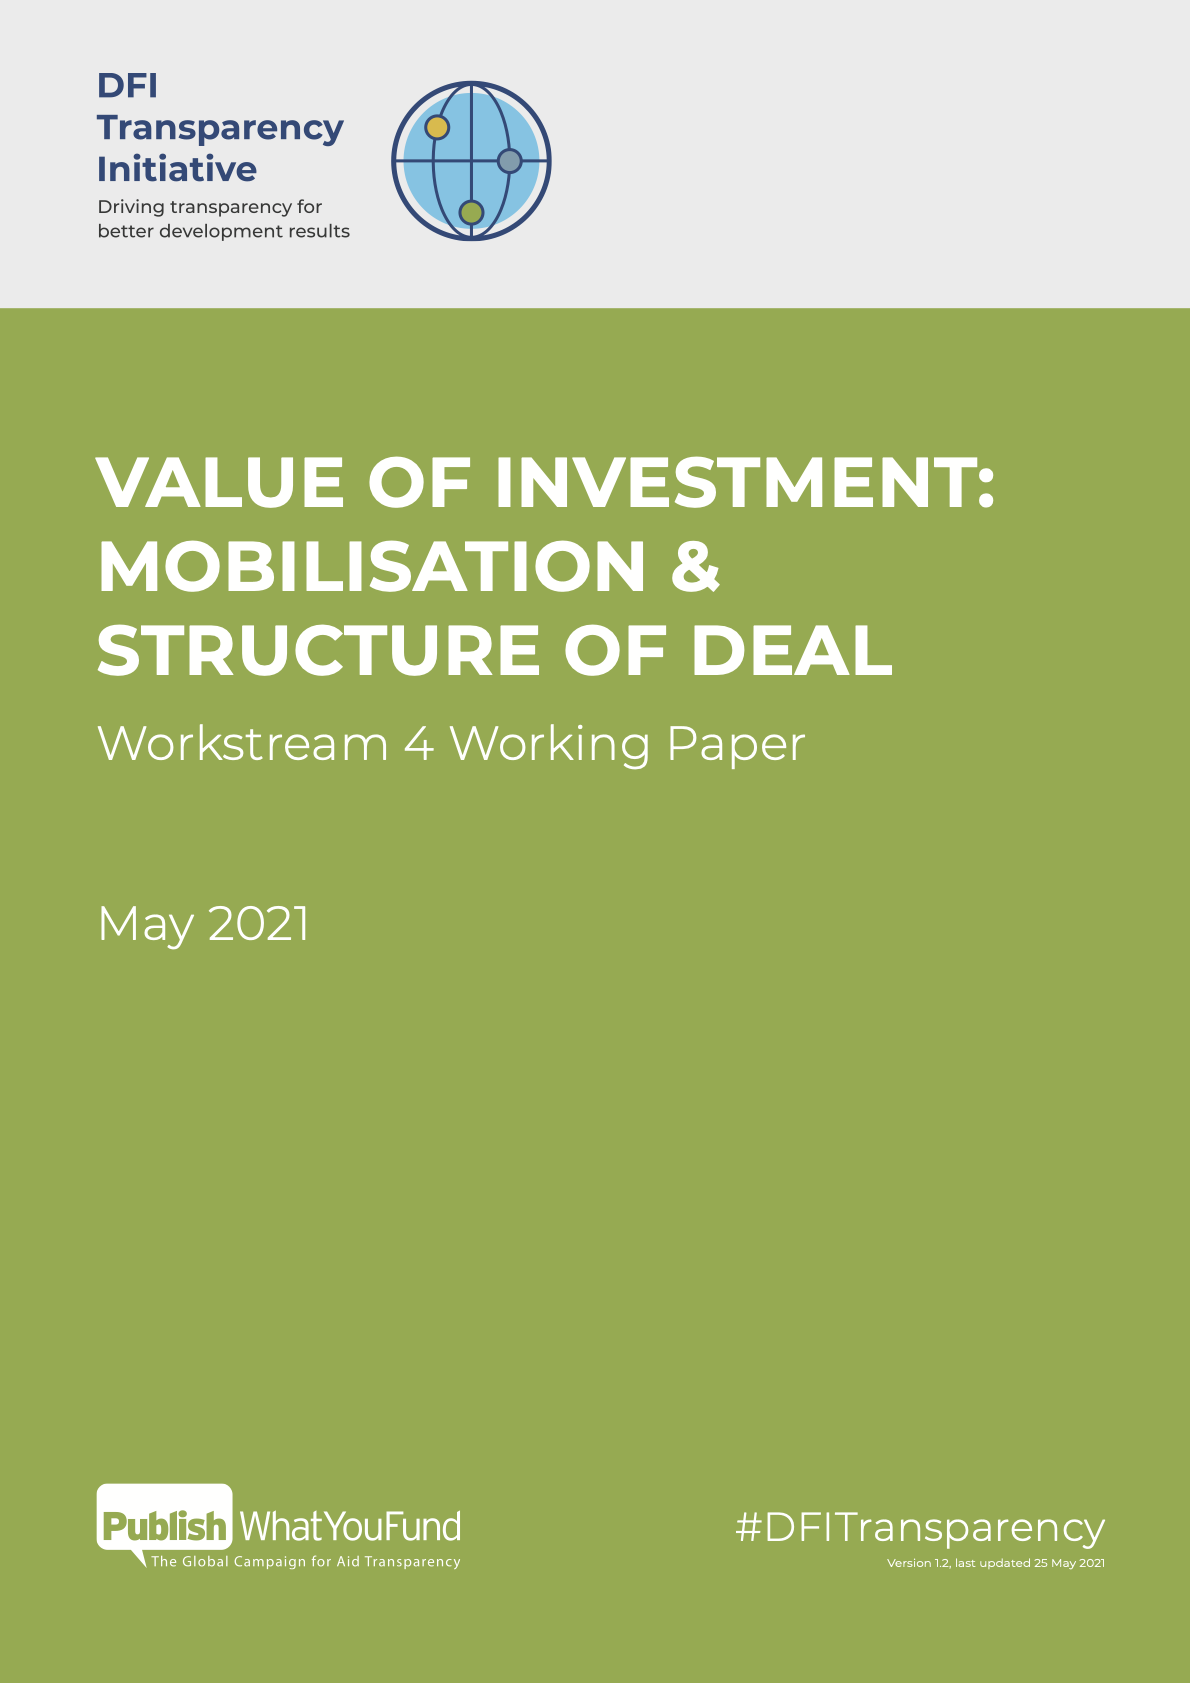 Value of Investment: Mobilization & Structure of Deal - Working Paper